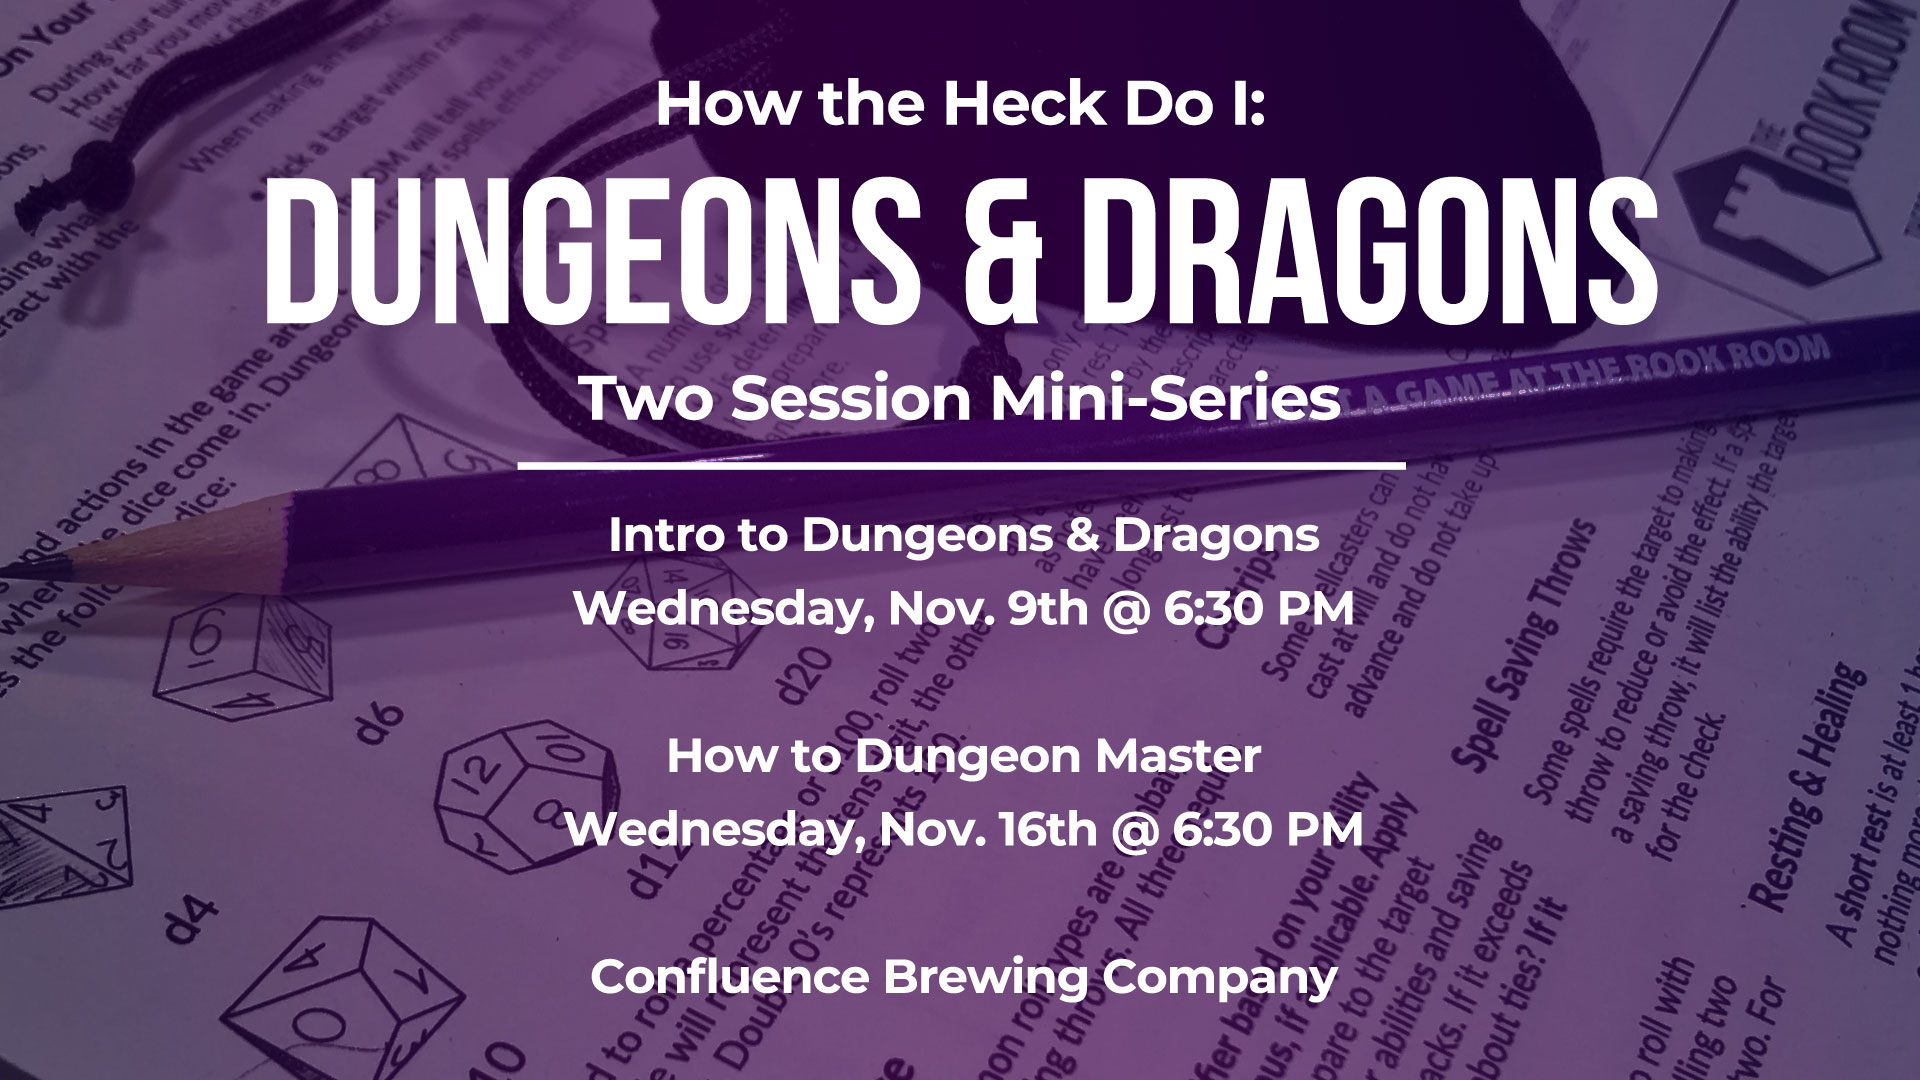 How the Heck Do I: Dungeons & Dragons Two Session Mini-Series Des Moines Event Image